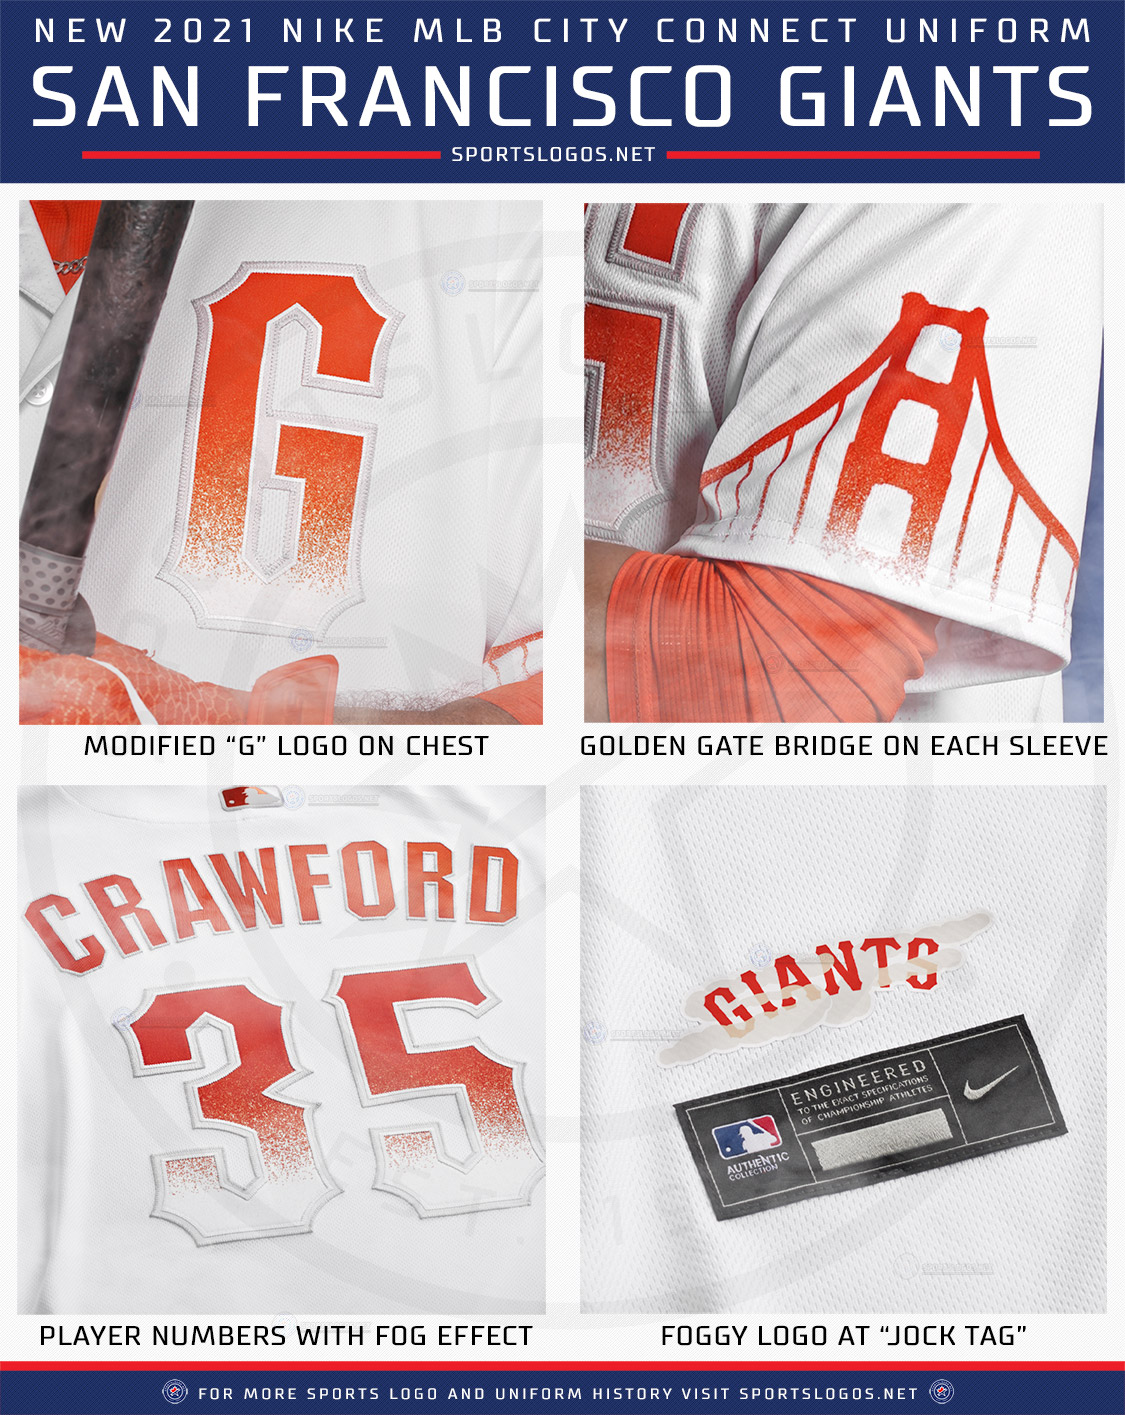 San Francisco Giants Release New City Connect Uniforms, Towering Above